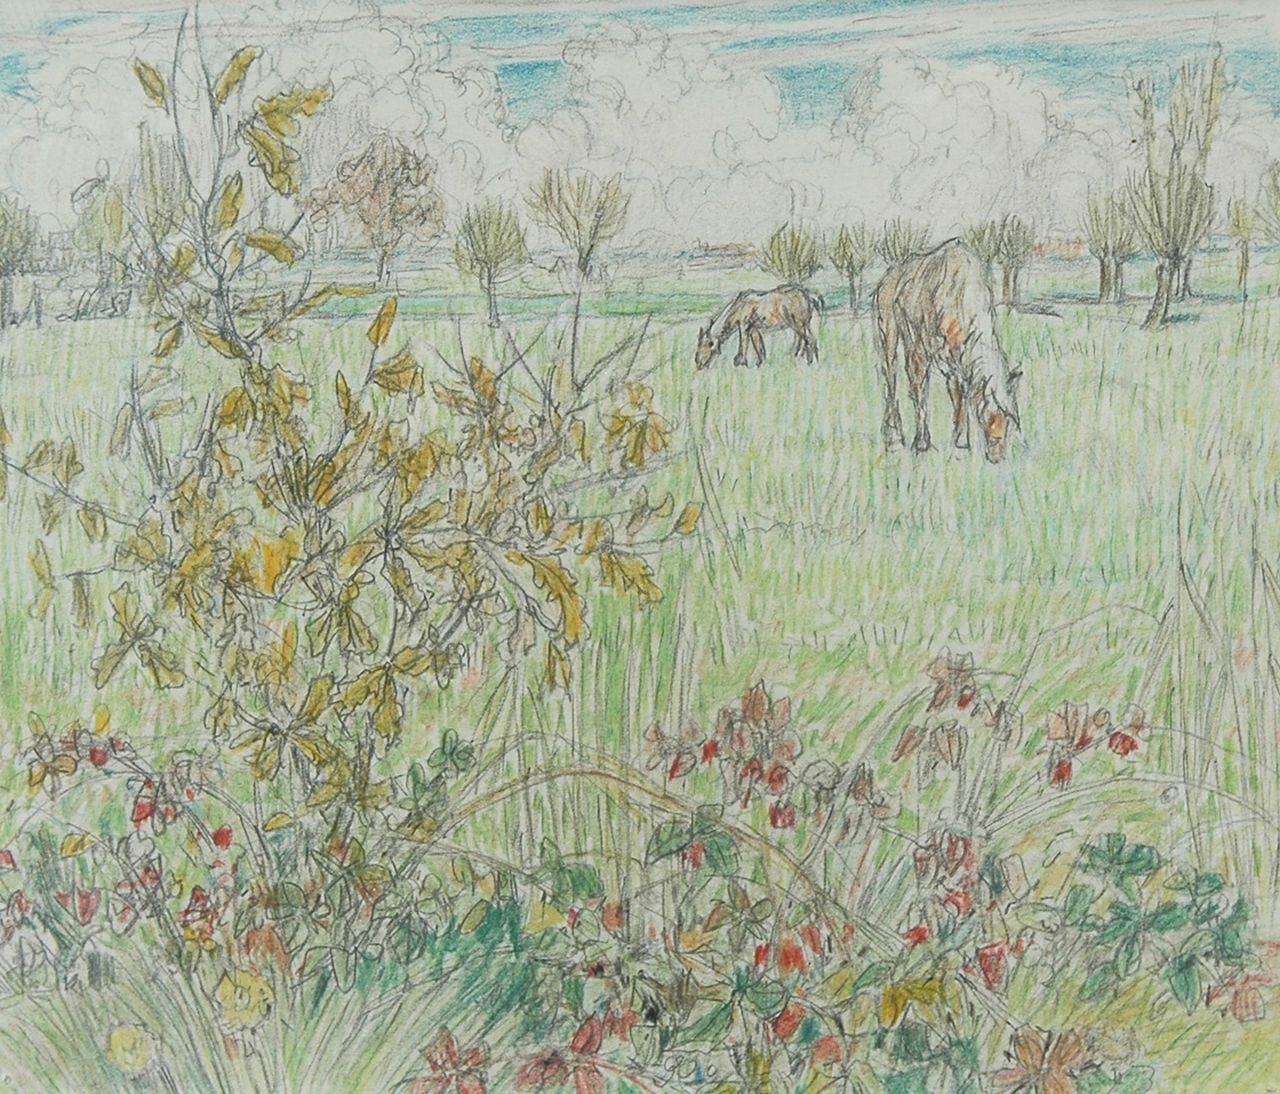 Kennedy R.W.  | Reinier Willem Kennedy, Horses and flowers in the meadow, Farbkreide auf Papier 15,8 x 18,0 cm, executed after 1928